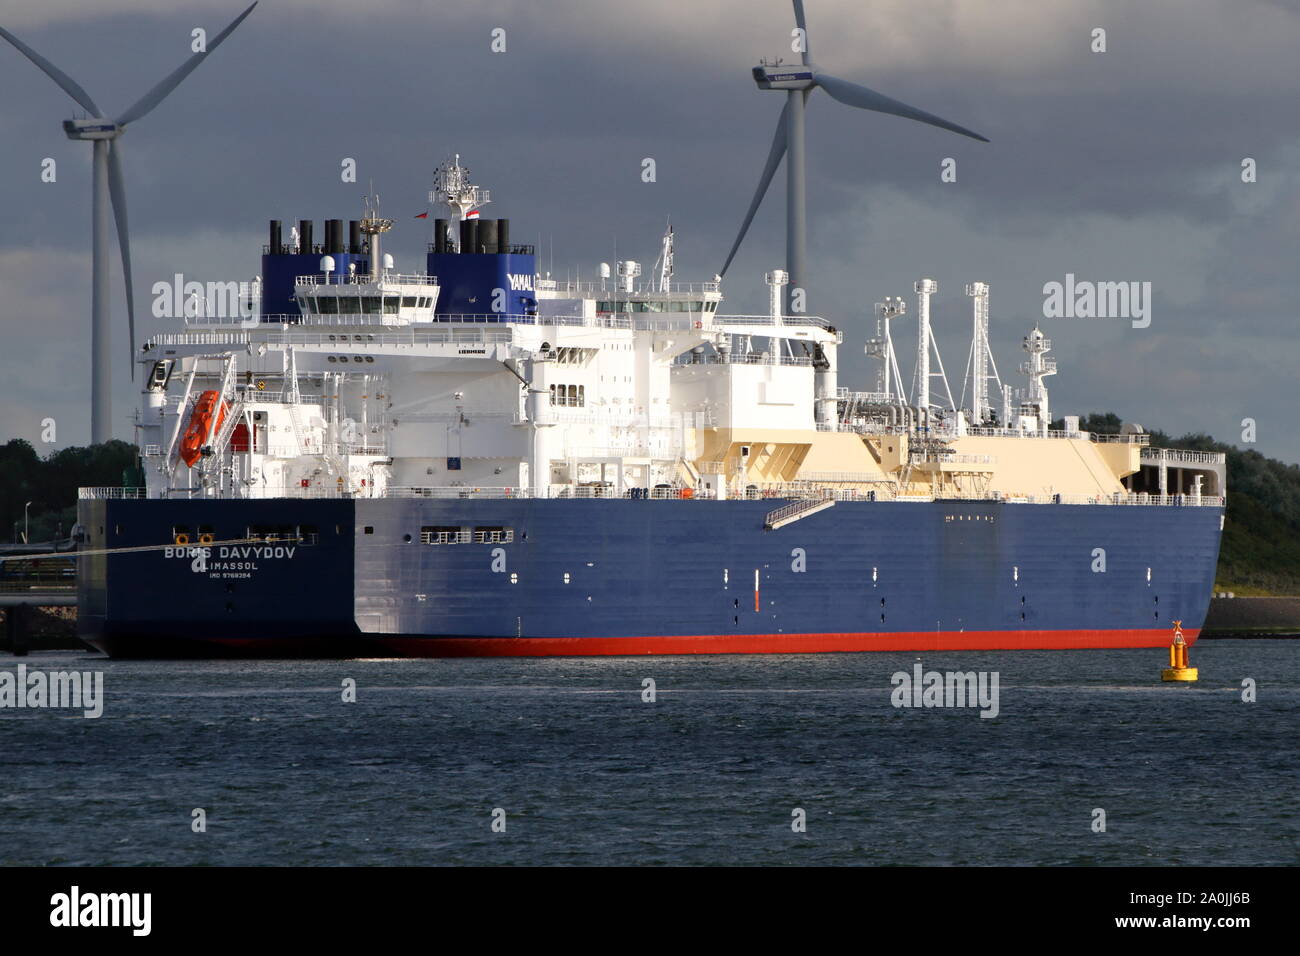 The LNG tanker Boris Davydov will be loaded on July 7, 2019 in the port of Rotterdam. Stock Photo